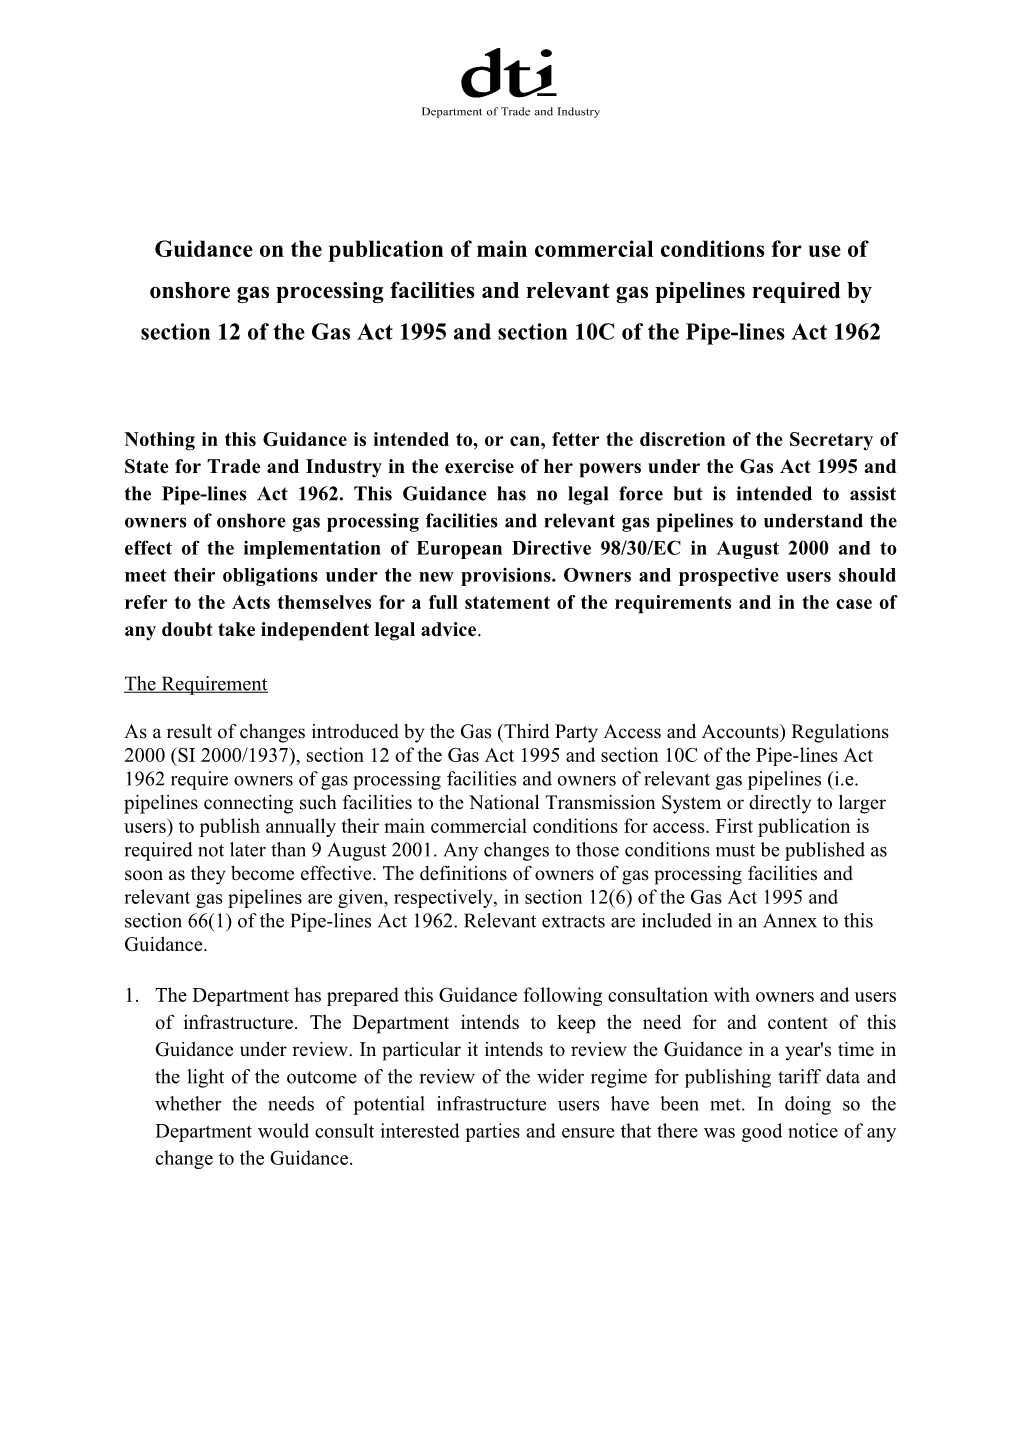 Guidance on the Publicaiton of Main Commercial Conditions of Access to Onshore Gas Processing